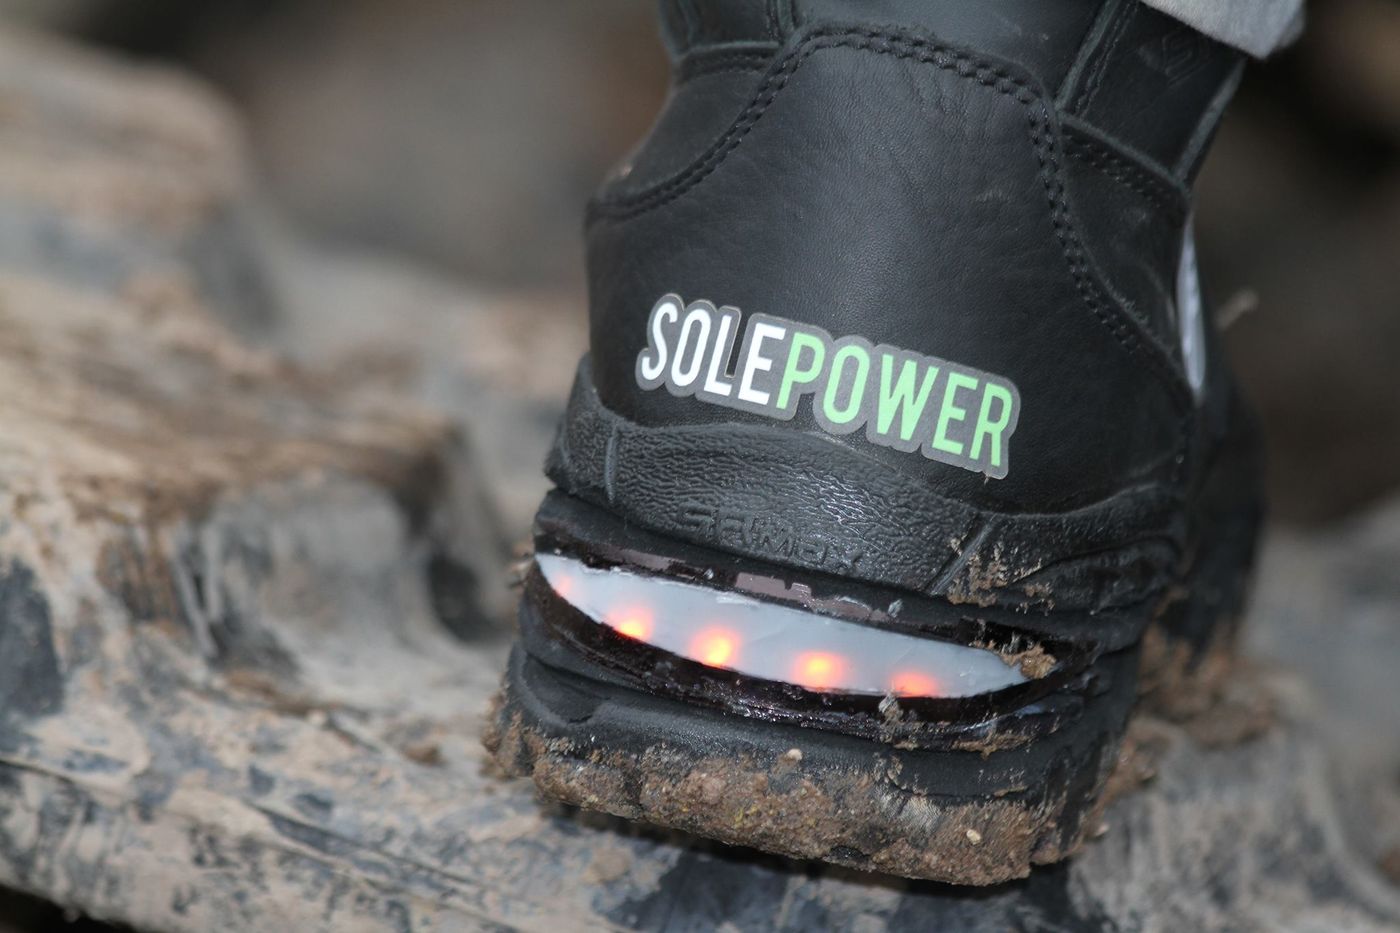 Smart Boot with light, credit: SolePower public Facebook photo (http://bit.ly/2h6vg2O)